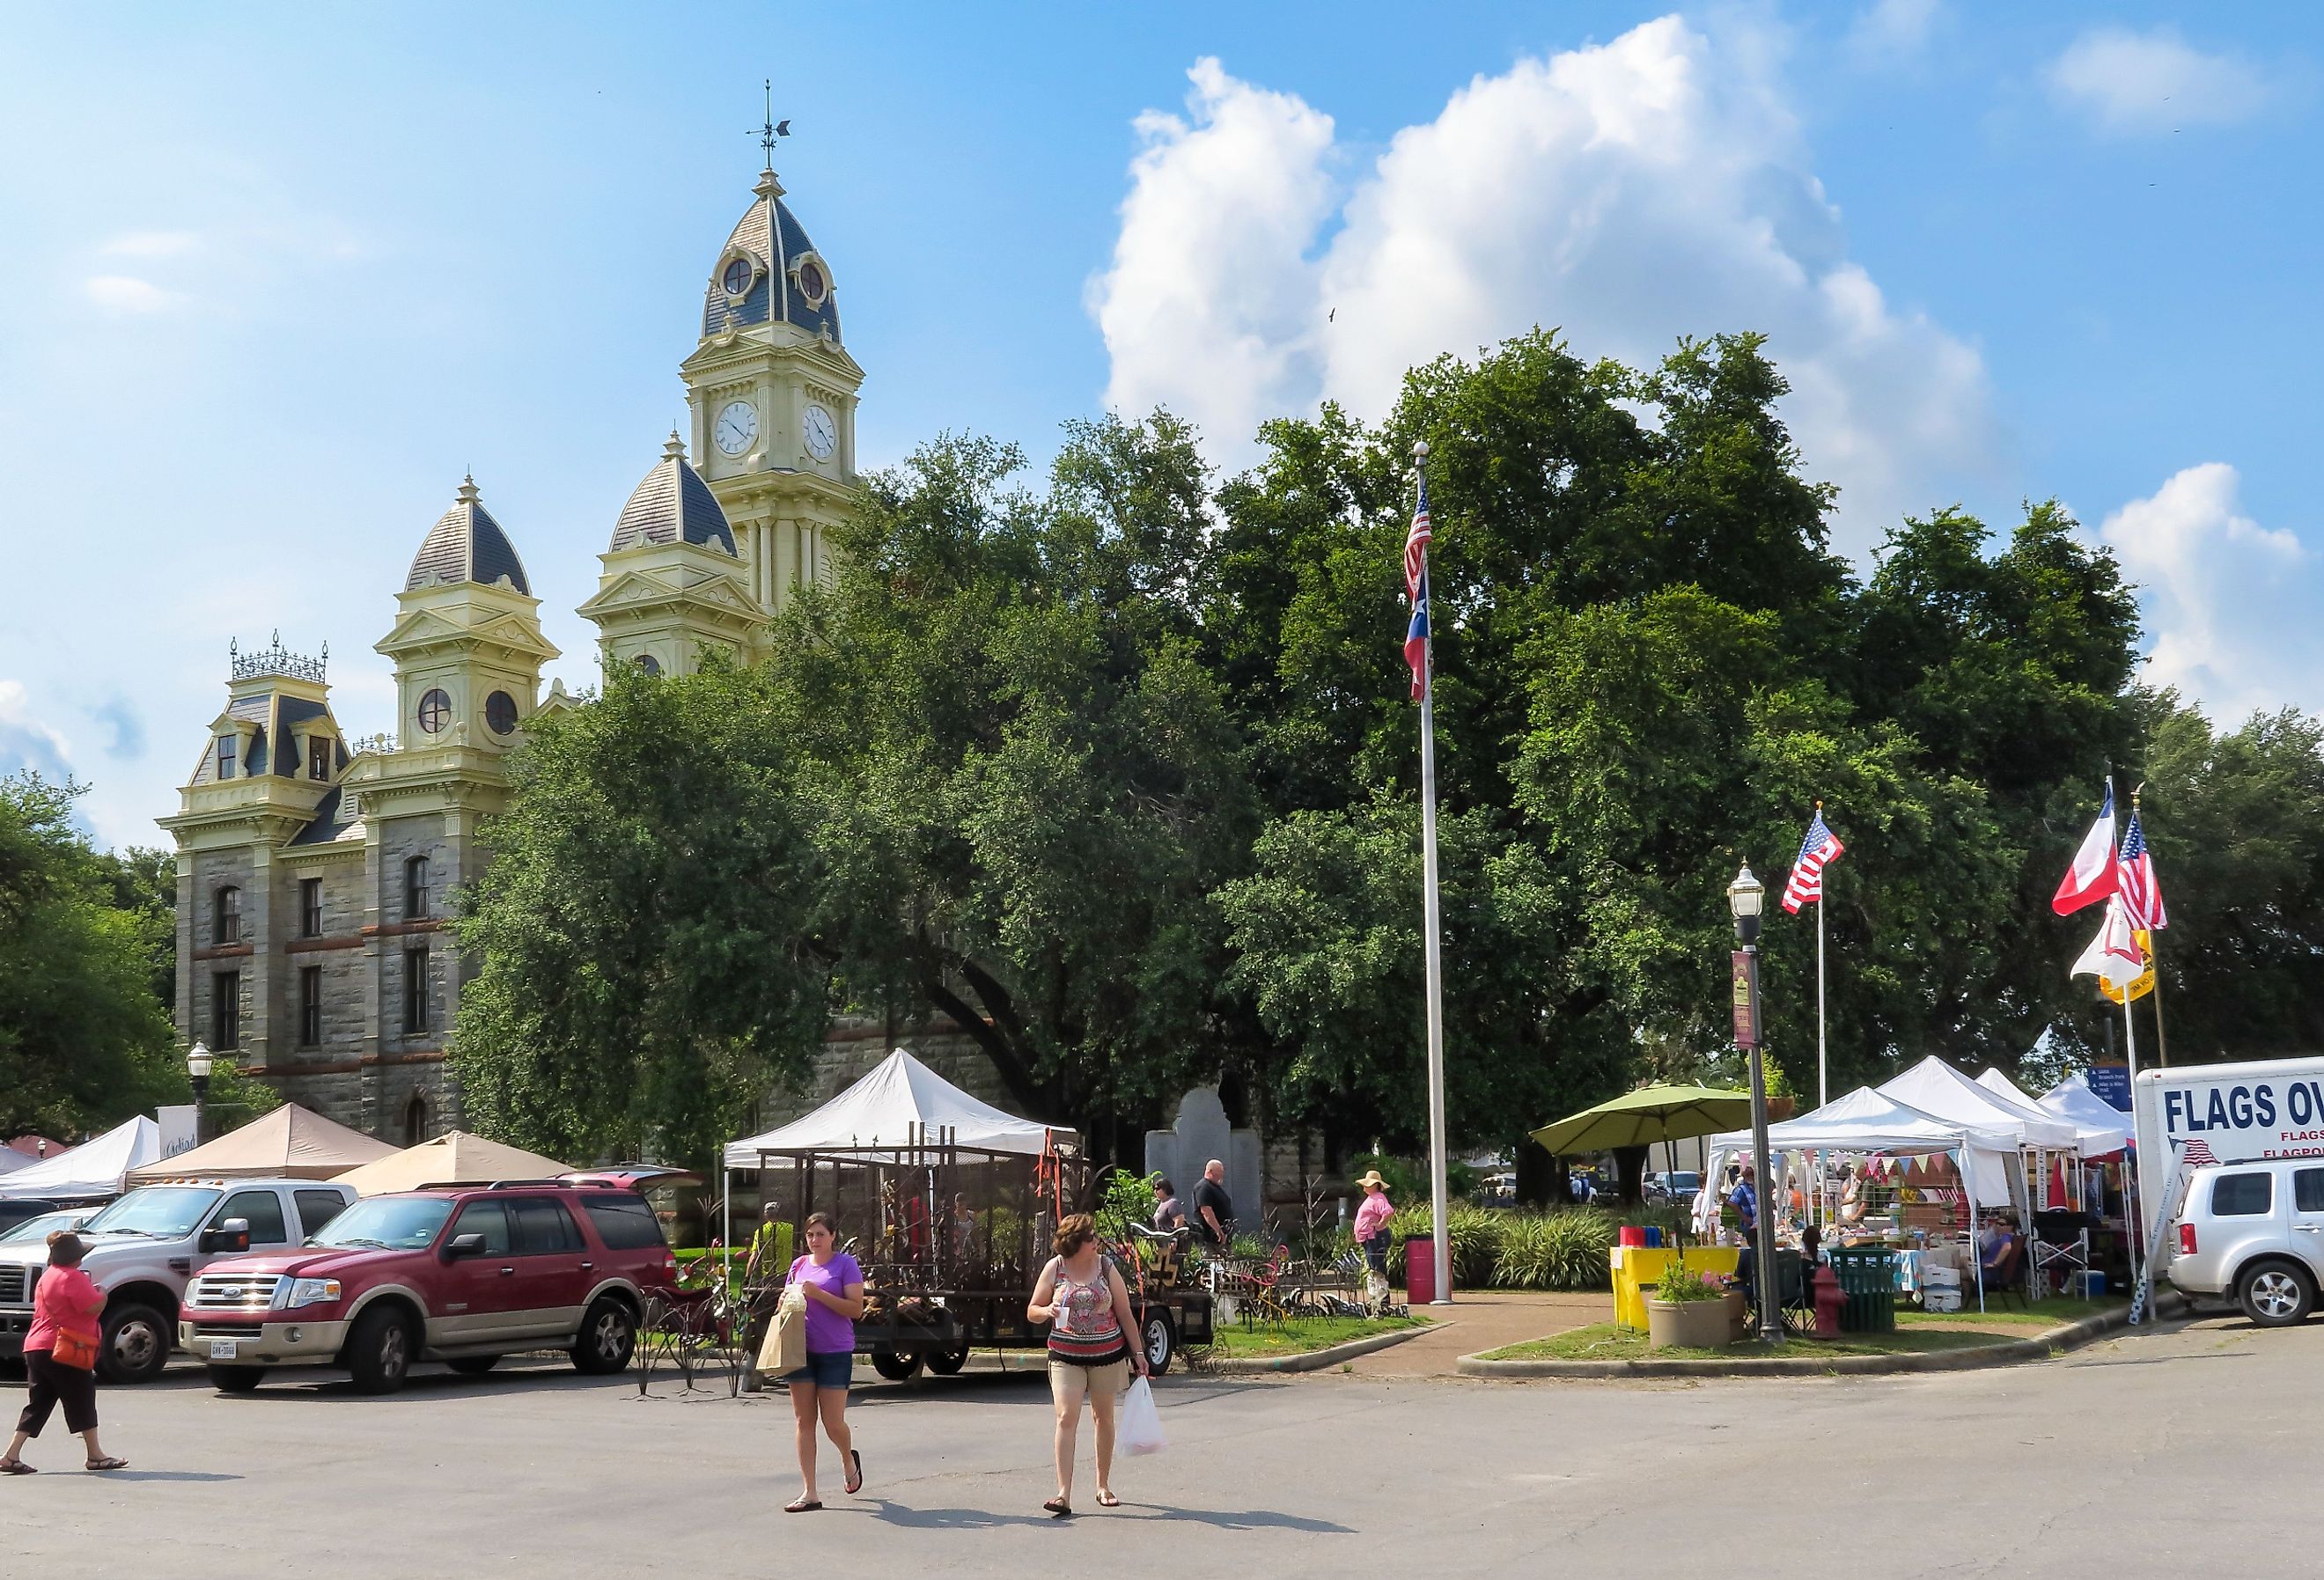 Market days surrounds the central square and Goliad County Courthouse, Texas. Image credit Philip Arno Photography via Shutterstock